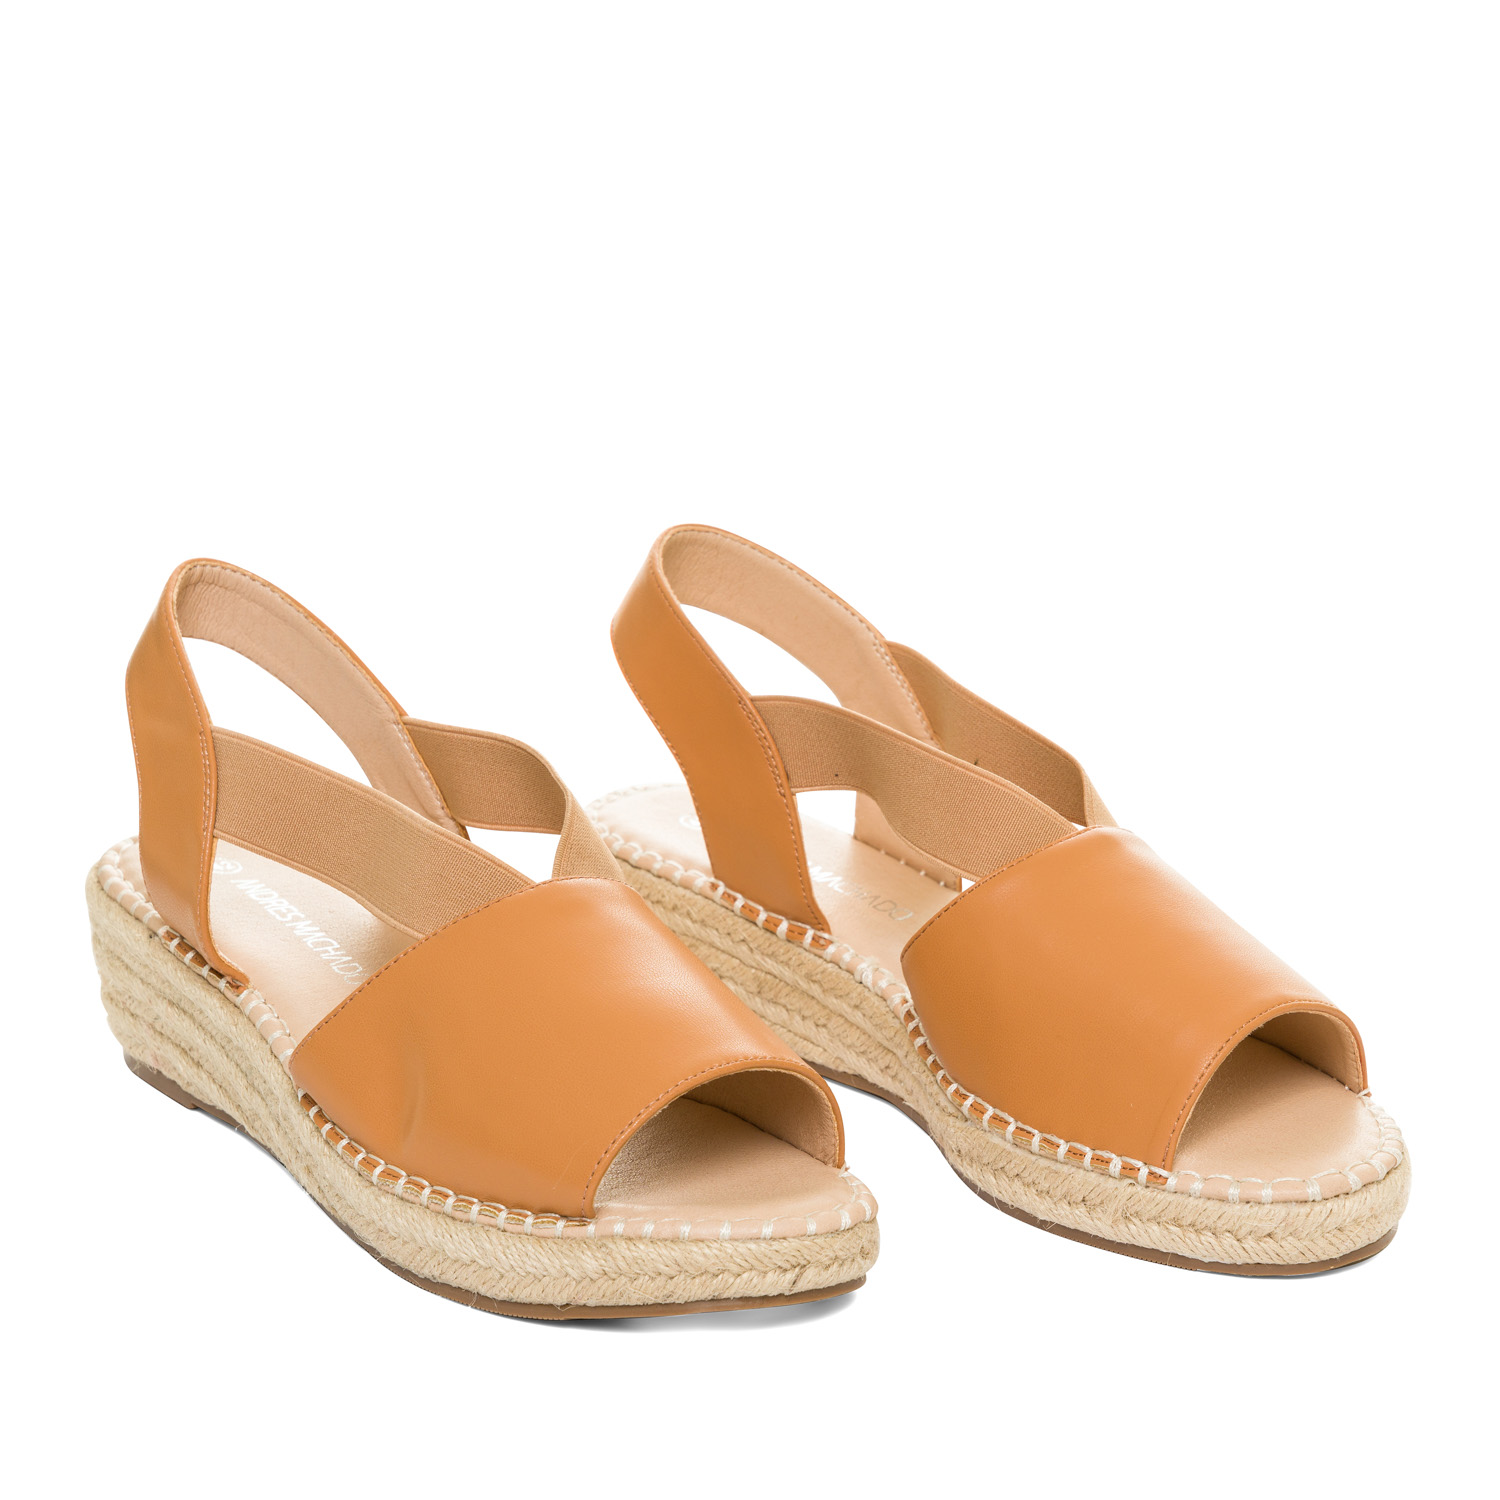 Camel faux leather sandals with jute wedge 